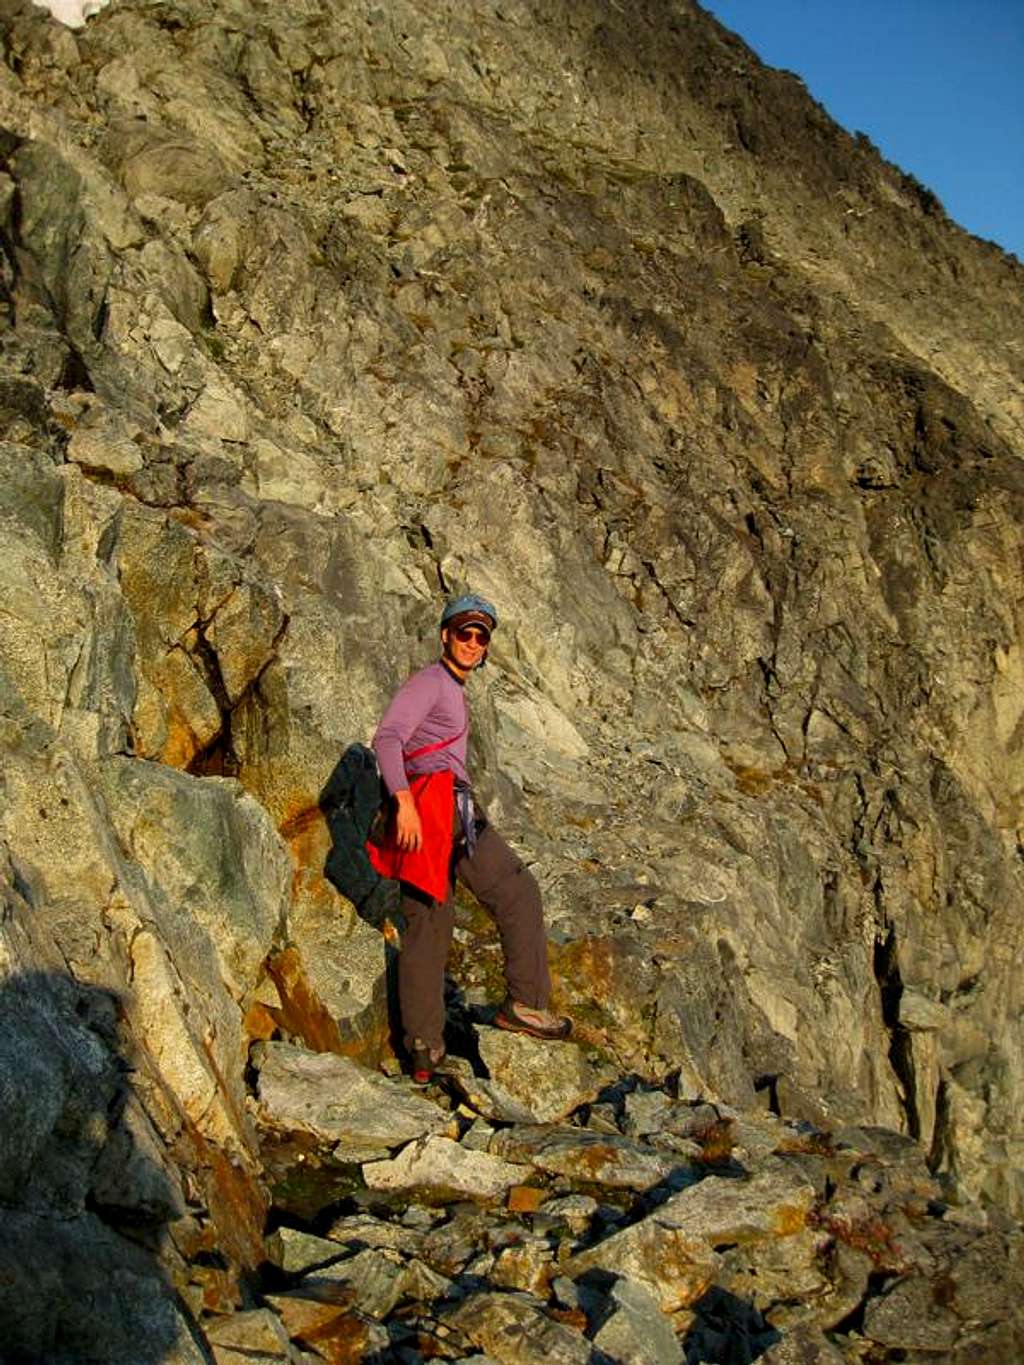 On the traverse